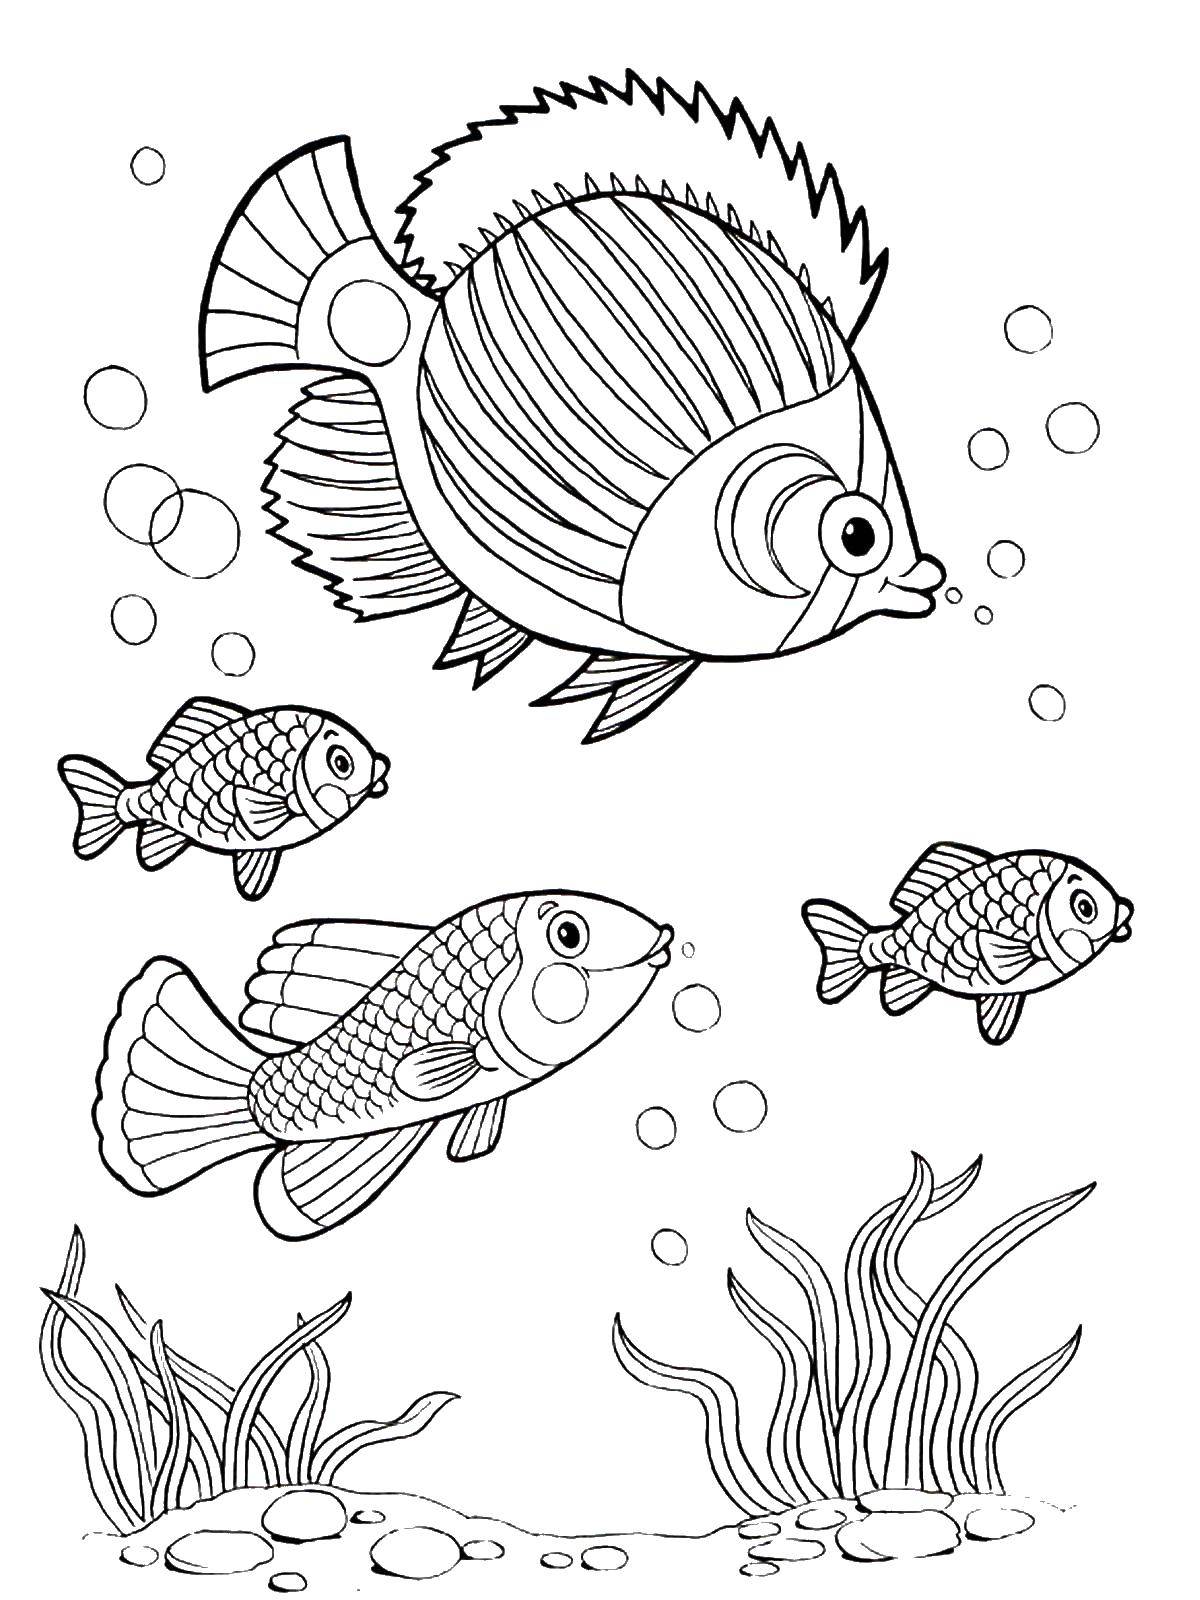 Coloring A variety of fish near the bottom. Category fish. Tags:  marine inhabitants, the sea, fish, water, bottom.